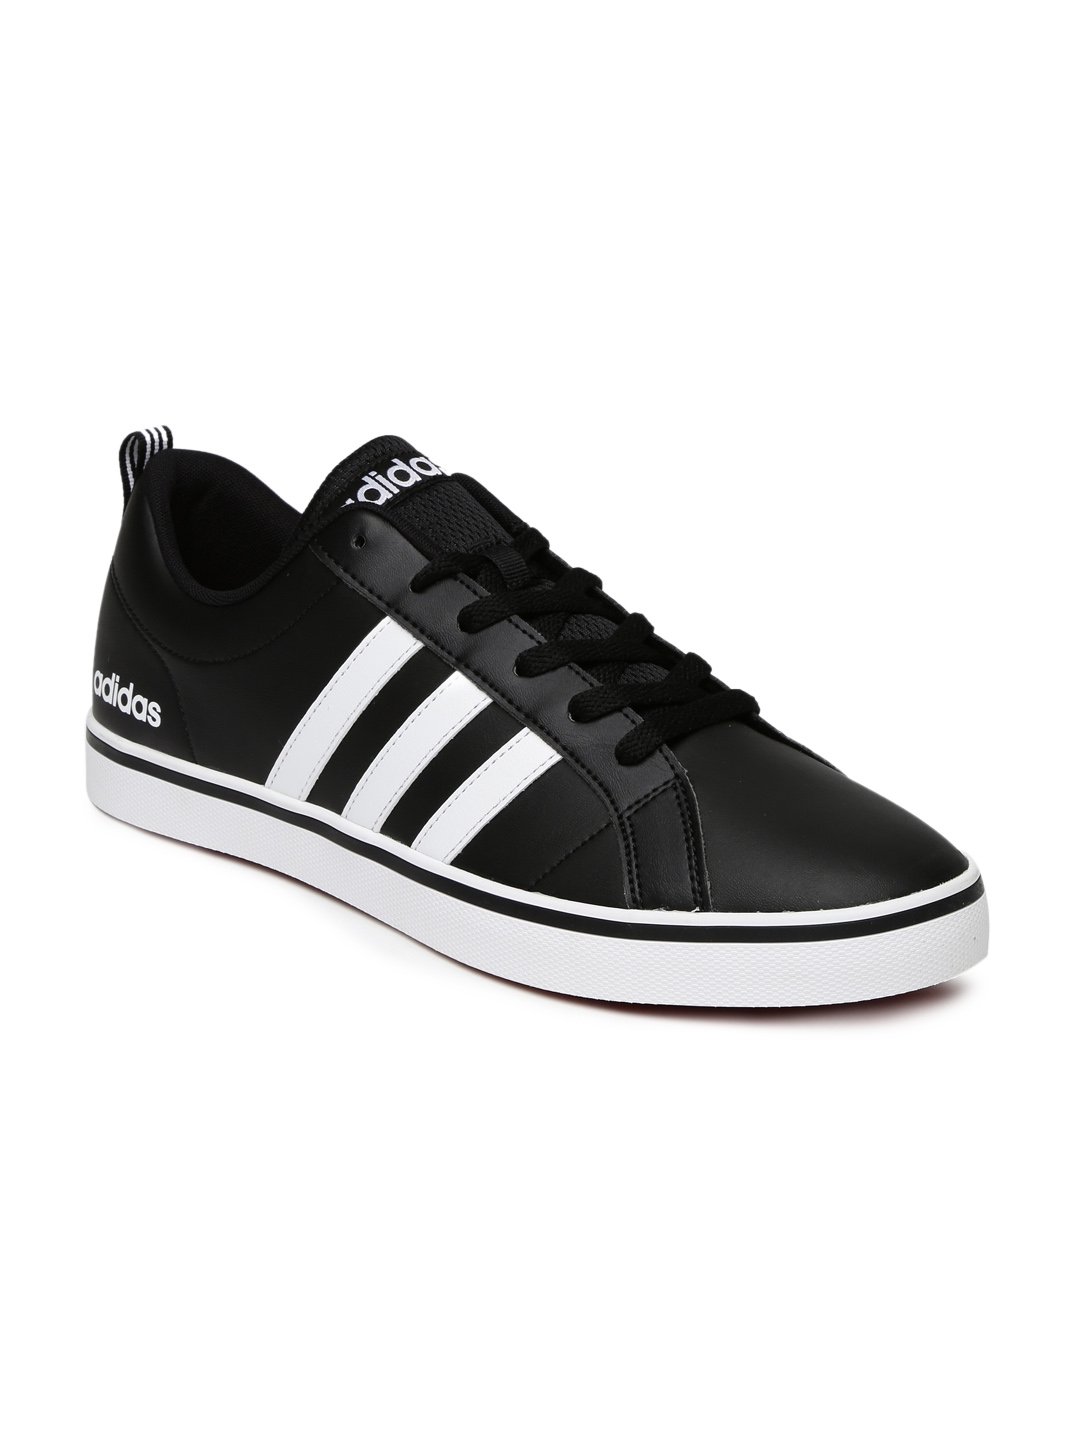 Buy ADIDAS NEO Men Black Solid Pace VS Leather Sneakers - Casual Shoes ...